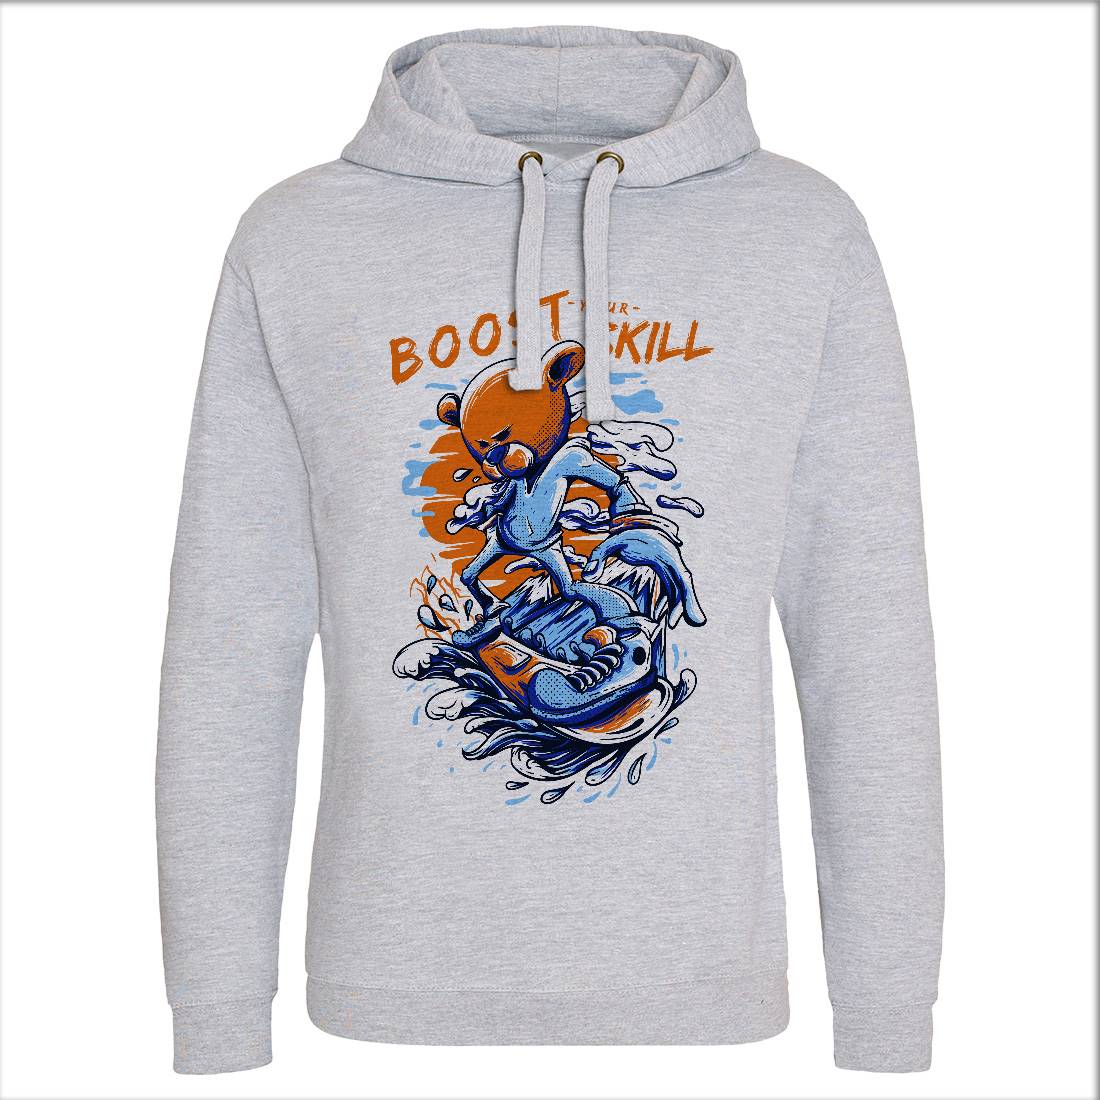 Boost Your Skill Mens Hoodie Without Pocket Surf D716